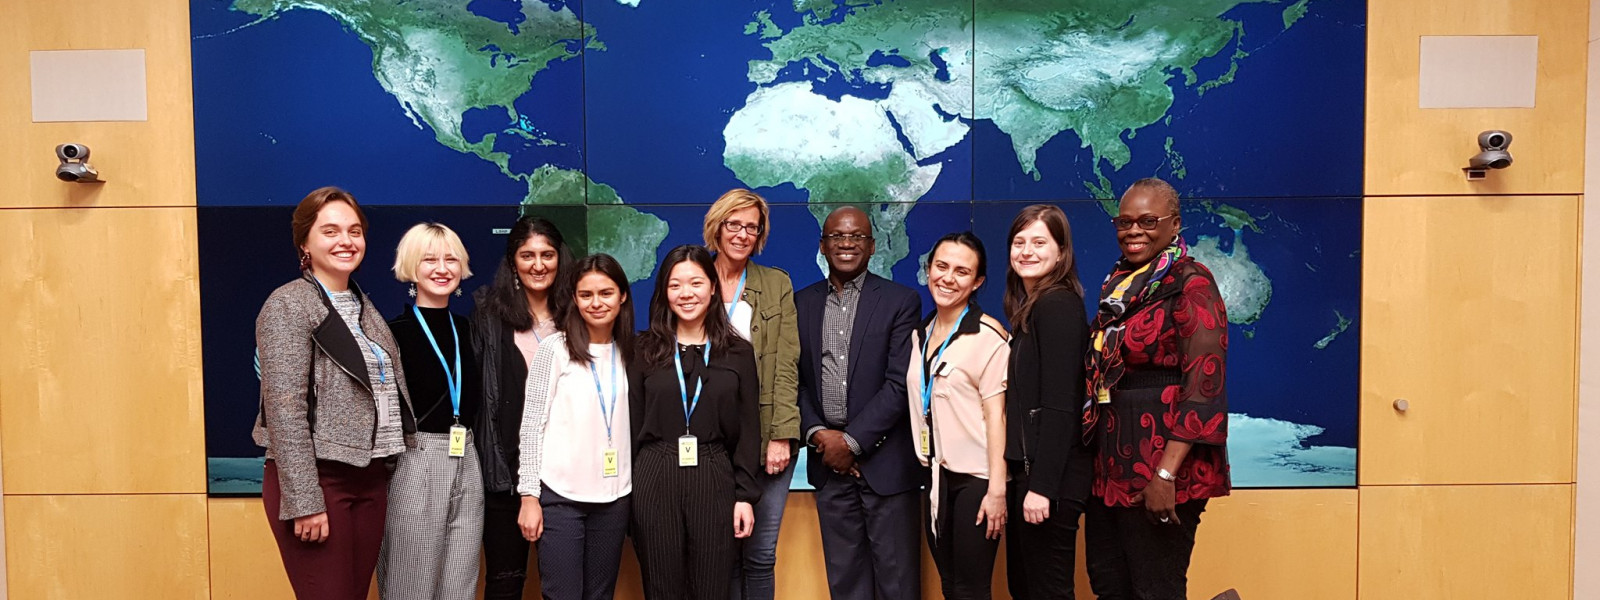 The group poses for a photo in front of a world map at the World Health Organization in Geneva.